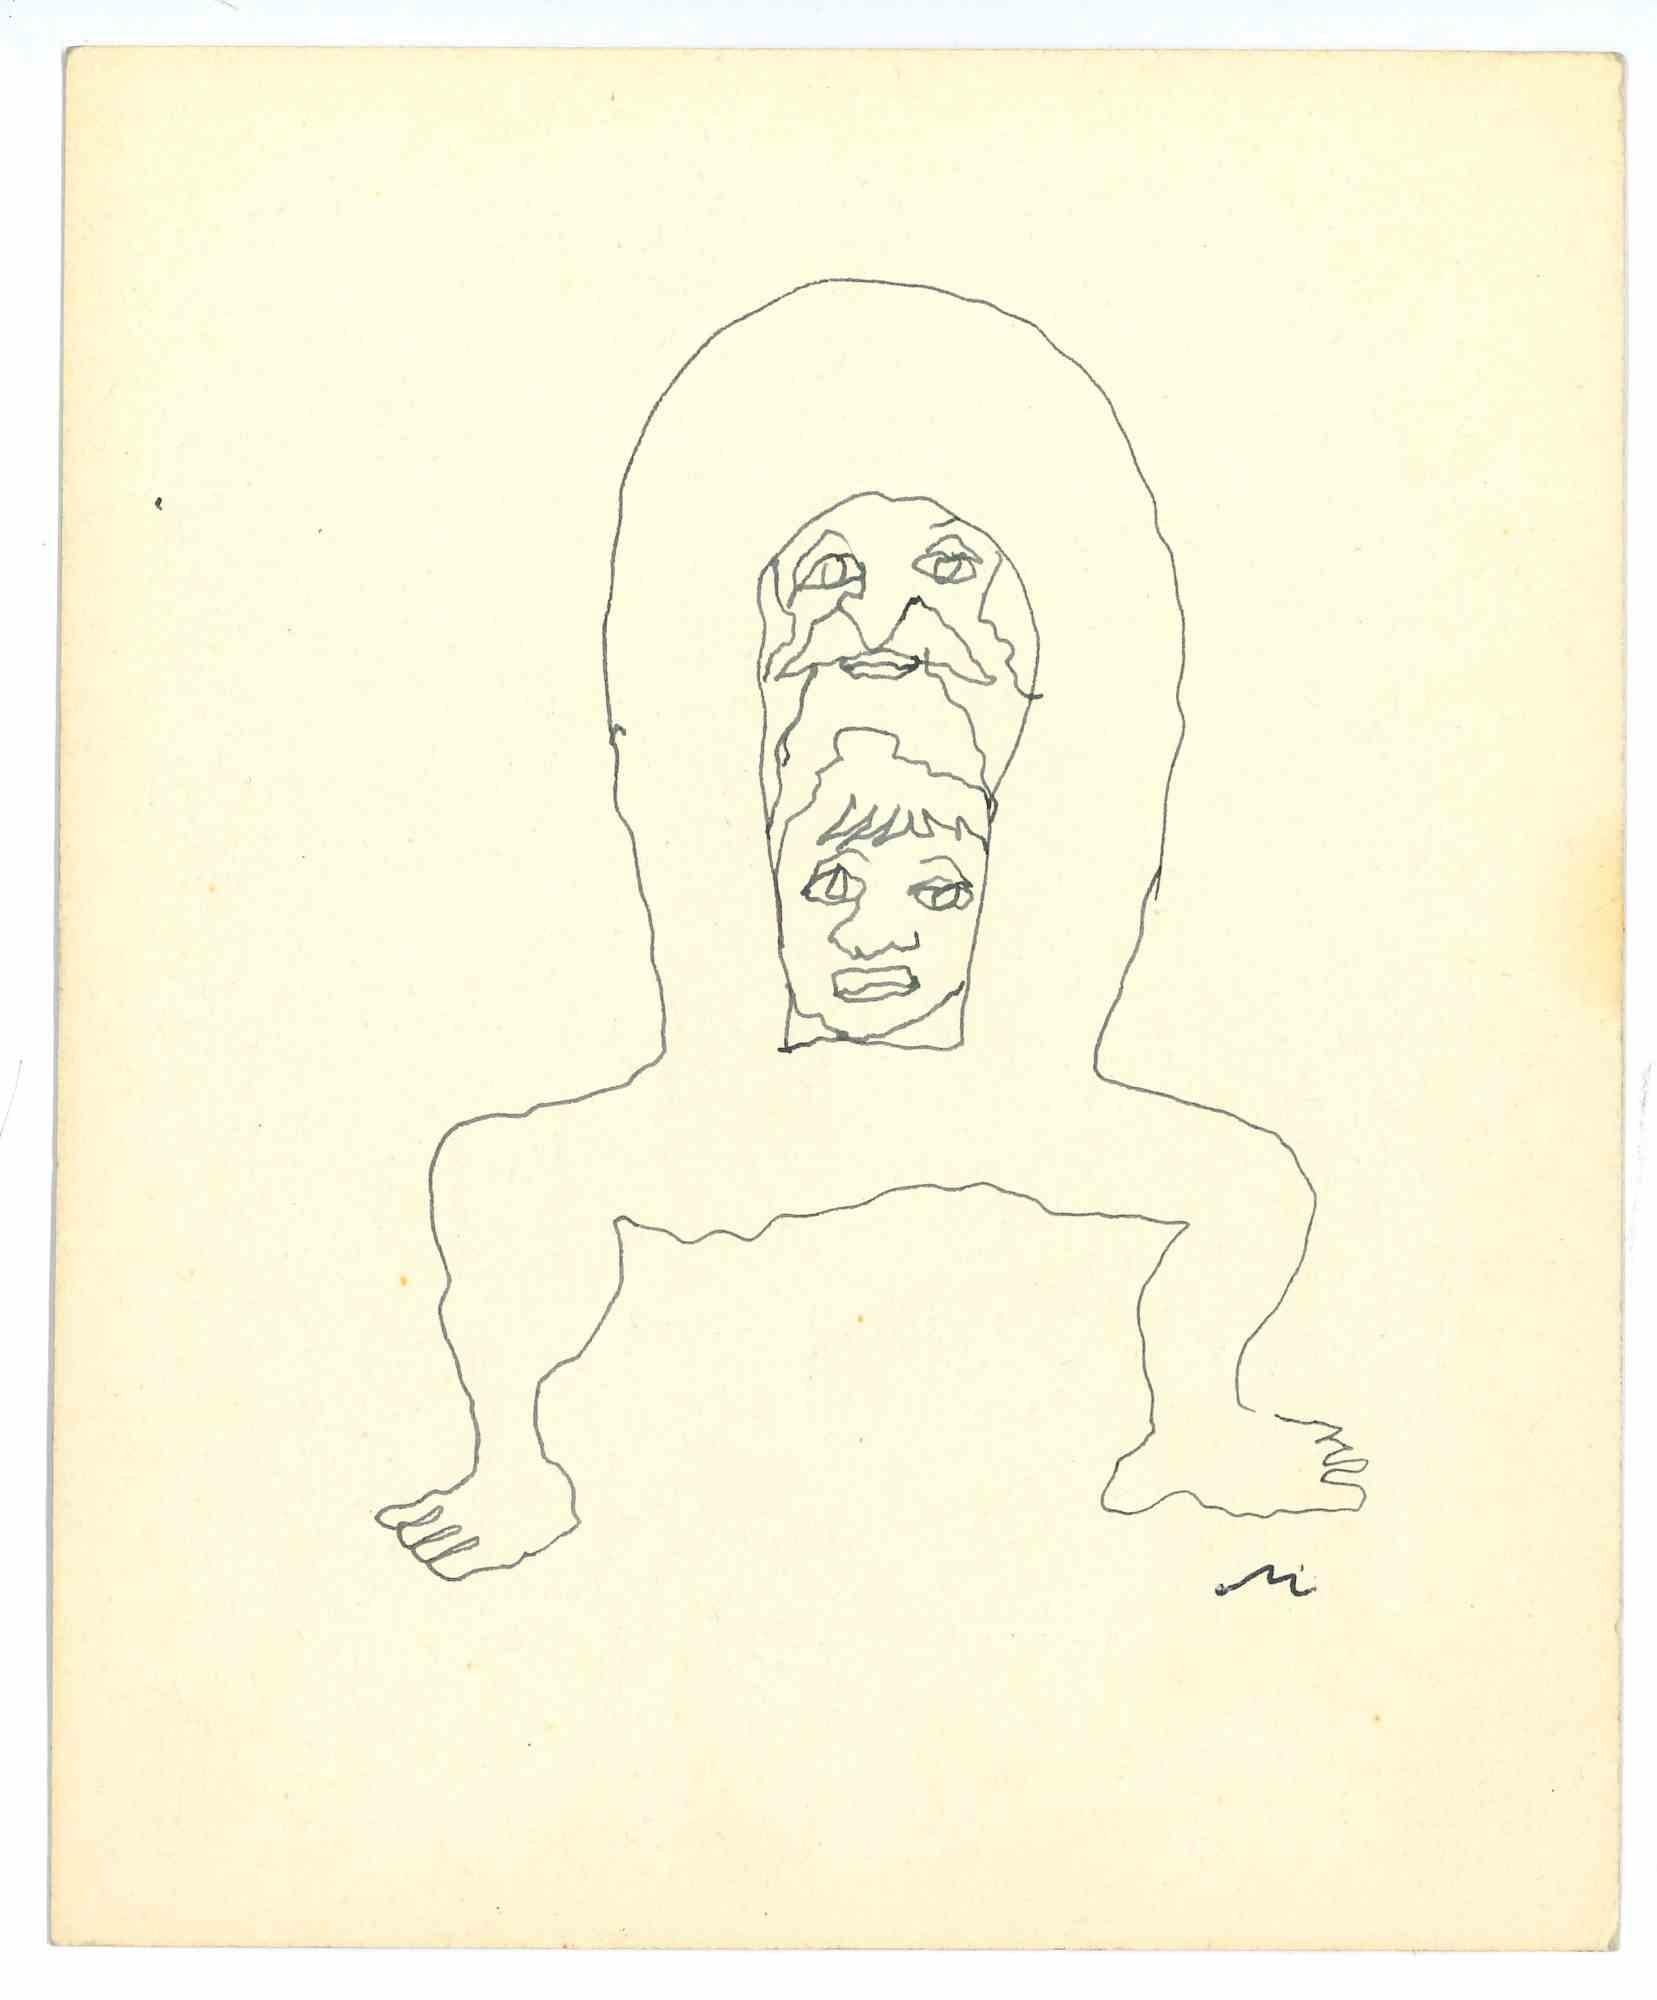 Distorted Body is a China Drawing realized by Mino Maccari  (1924-1989) in the 1960s.

Monogrammed on the lower.

Good conditions.

Mino Maccari (Siena, 1924-Rome, June 16, 1989) was an Italian writer, painter, engraver and journalist, winner of the